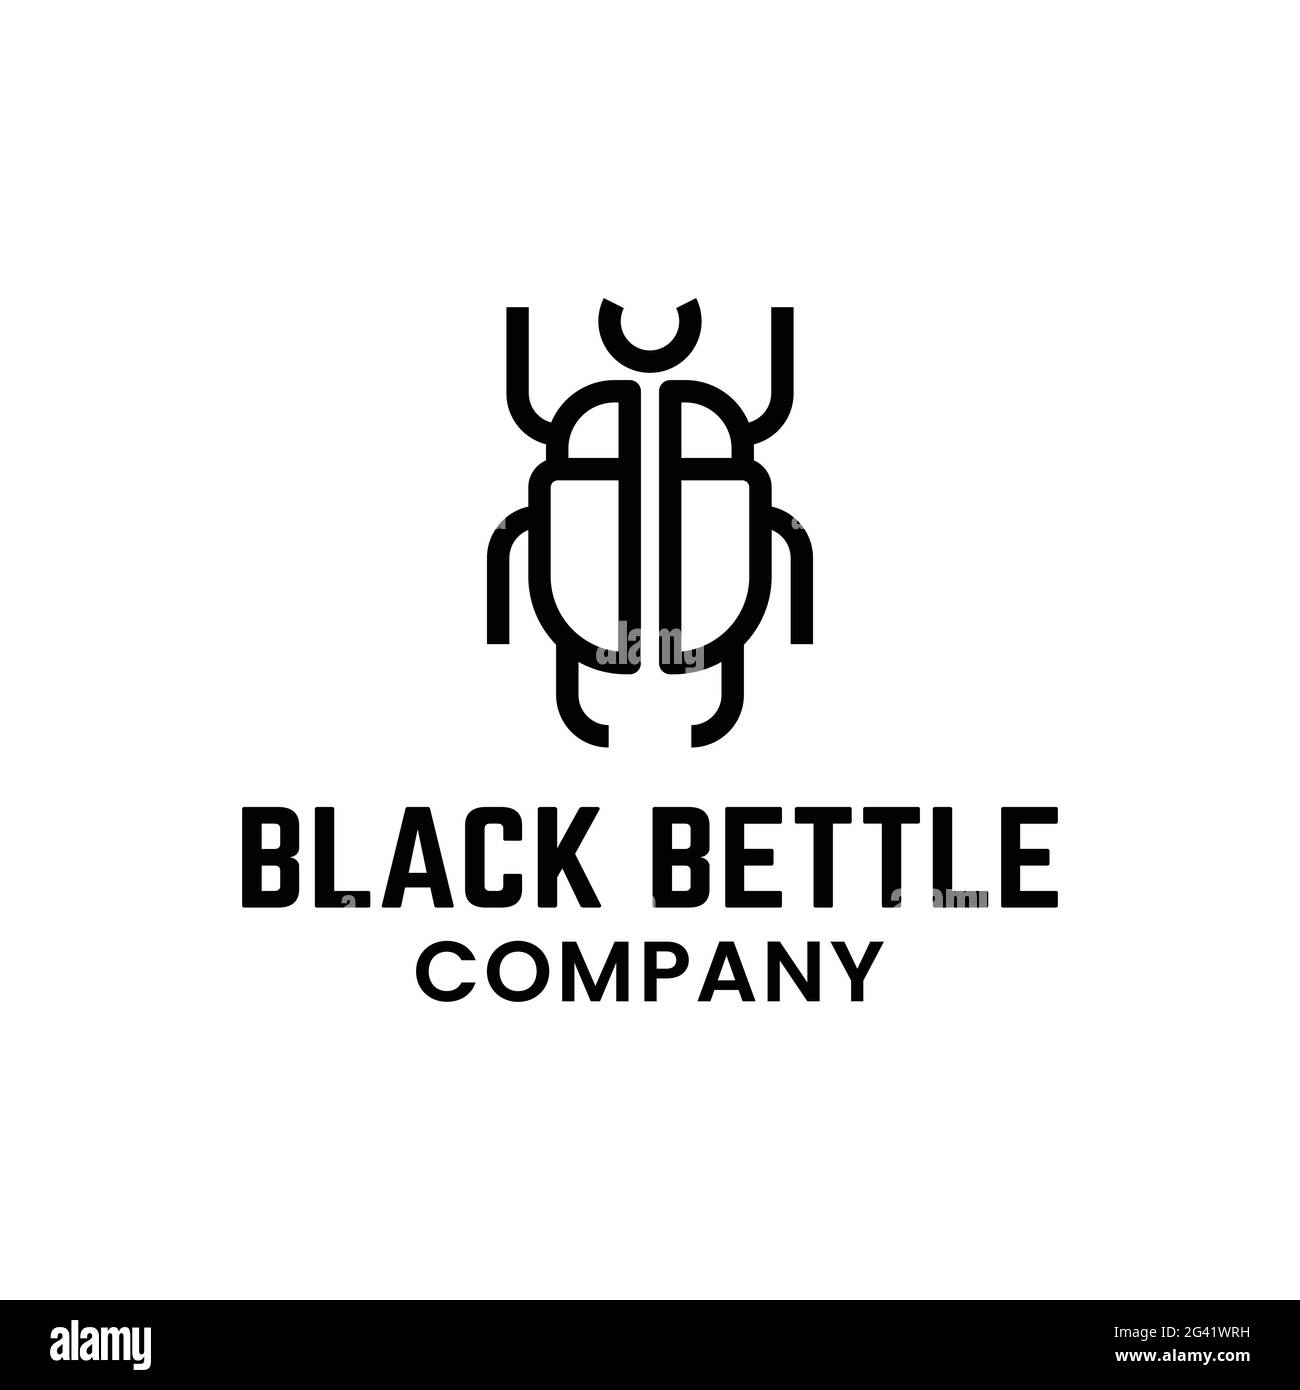 Letter Initial BB for Black Beetle Logo Design Template.  The letter BB forms Beetle in Simple Line Linear Outline Style. Stock Vector